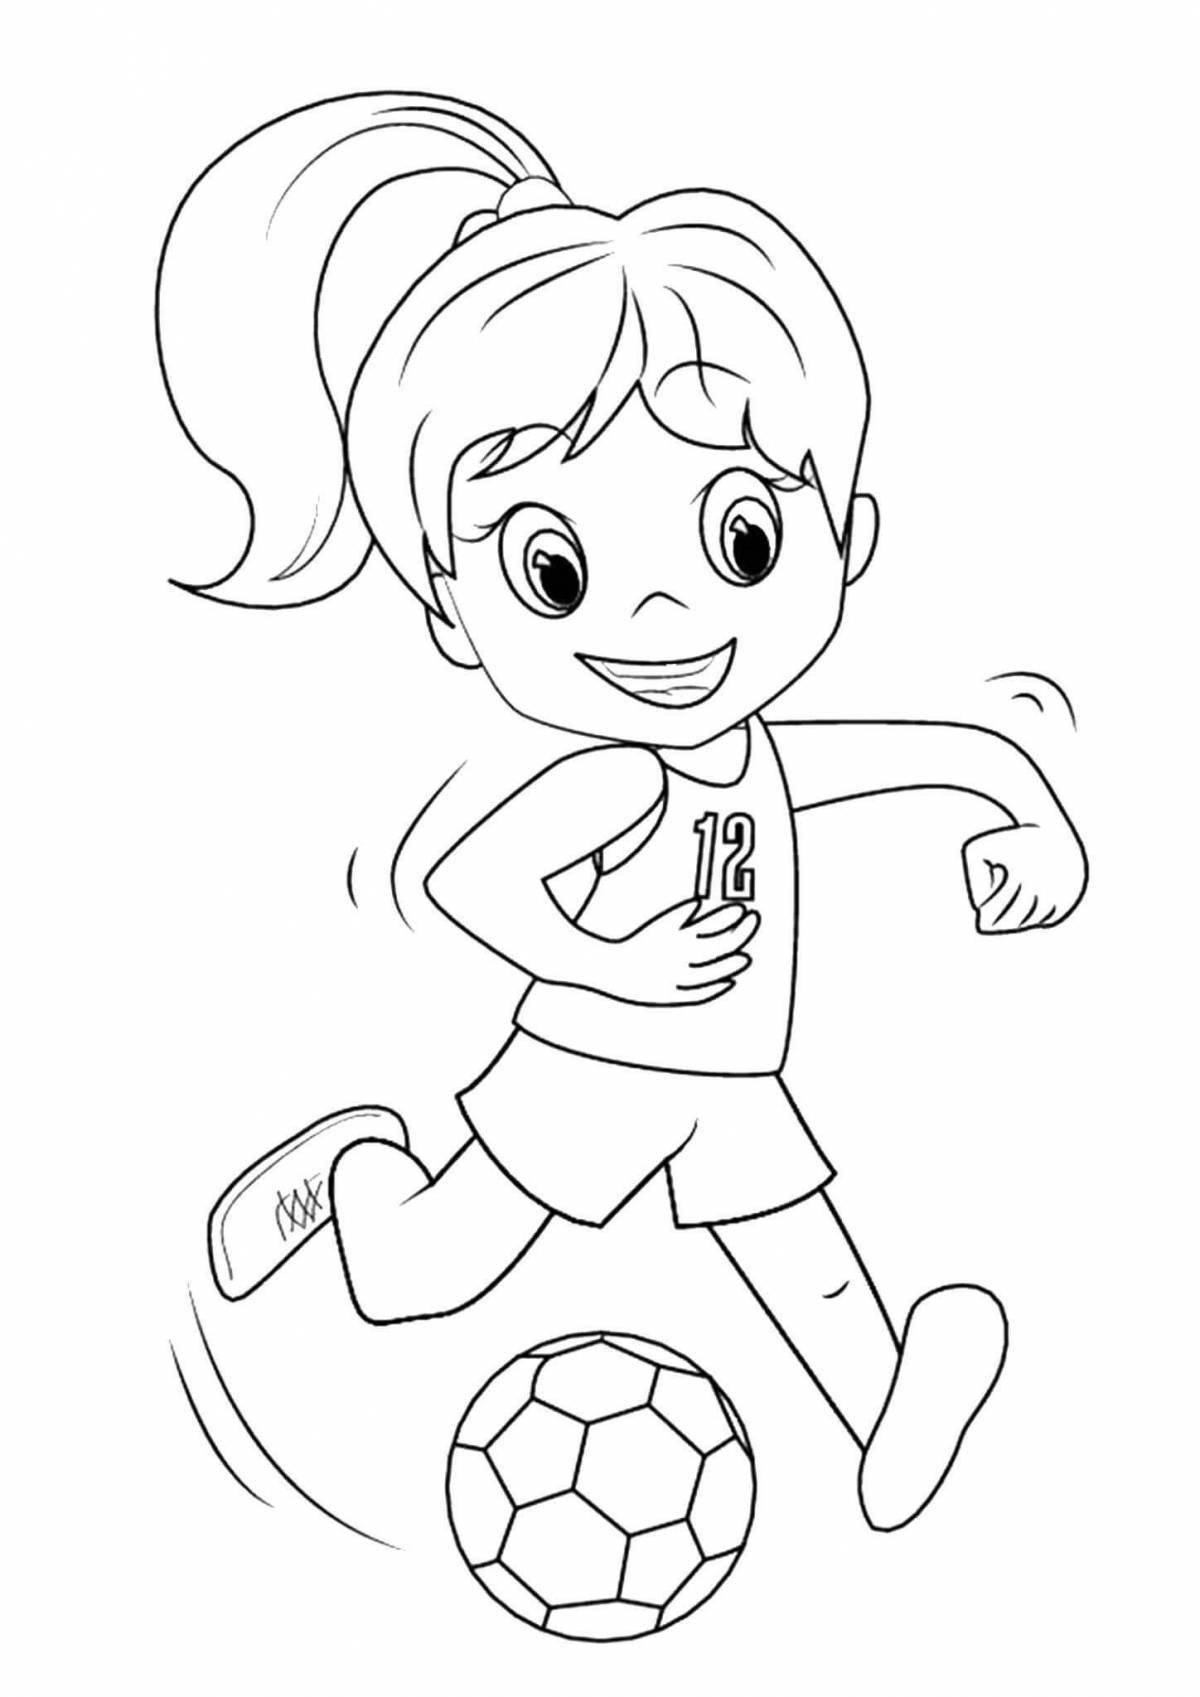 A fun sports coloring book for kids 5-6 years old